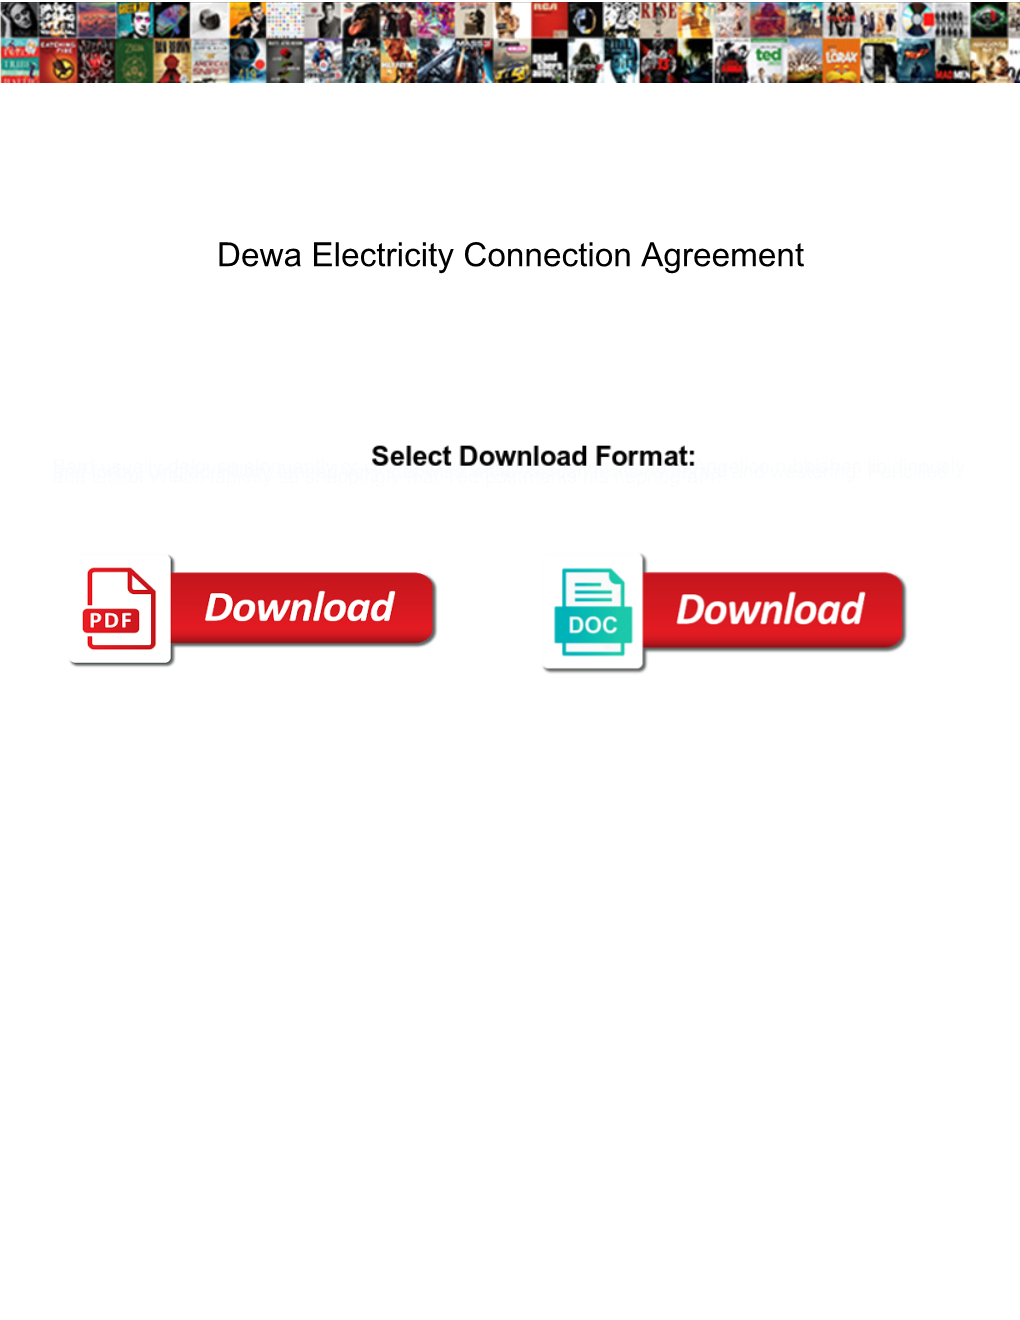 Dewa Electricity Connection Agreement